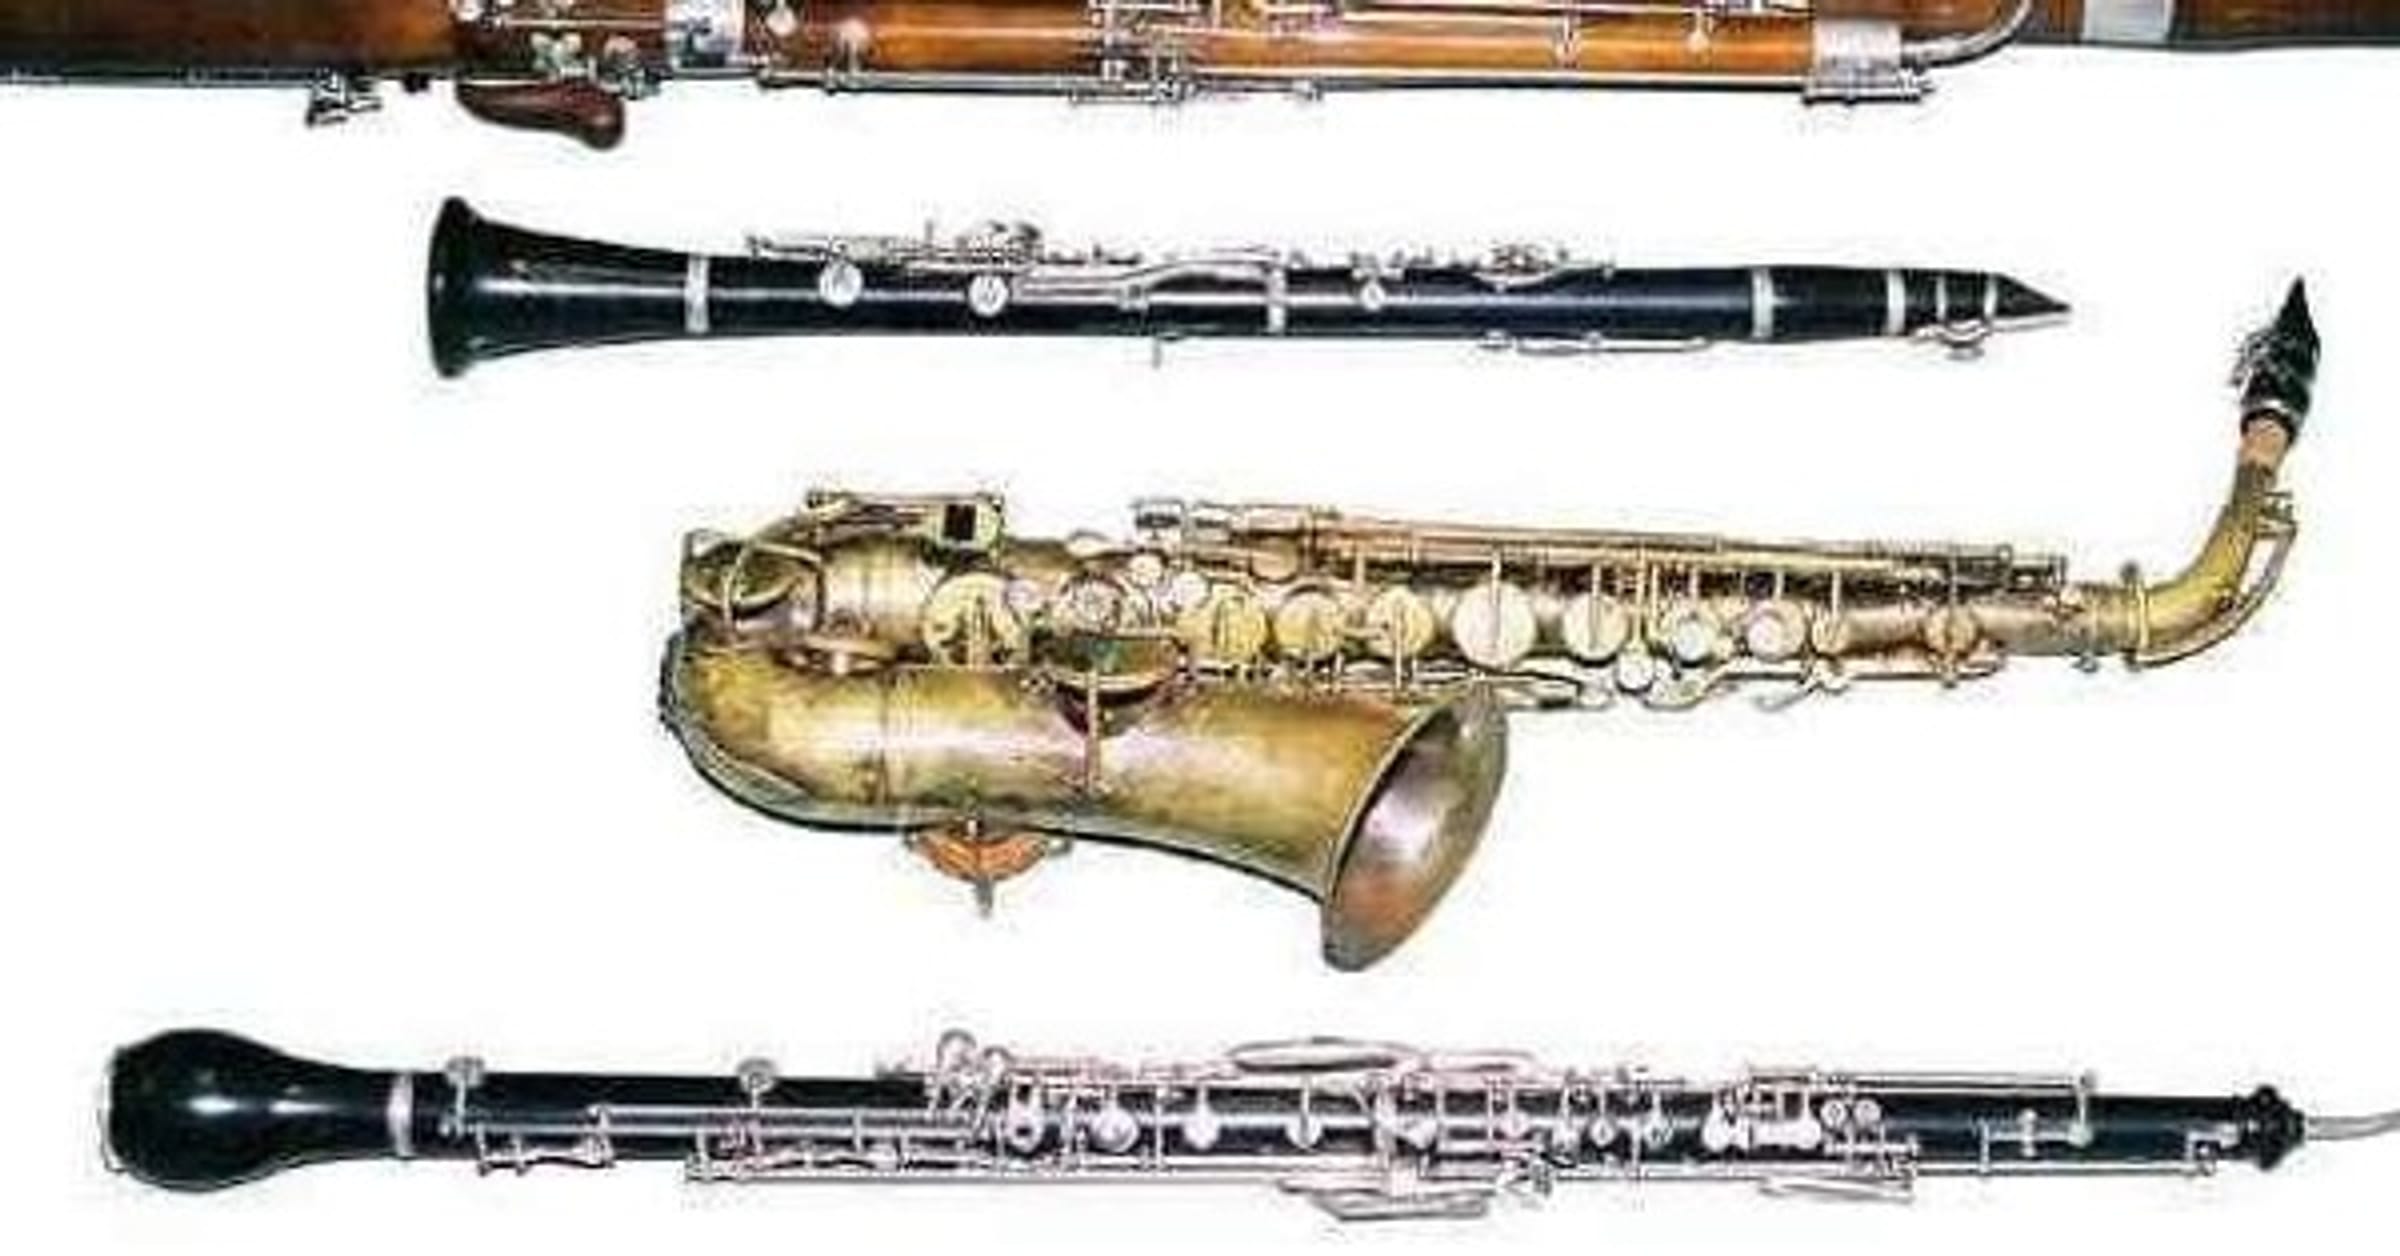 music mouth instruments names